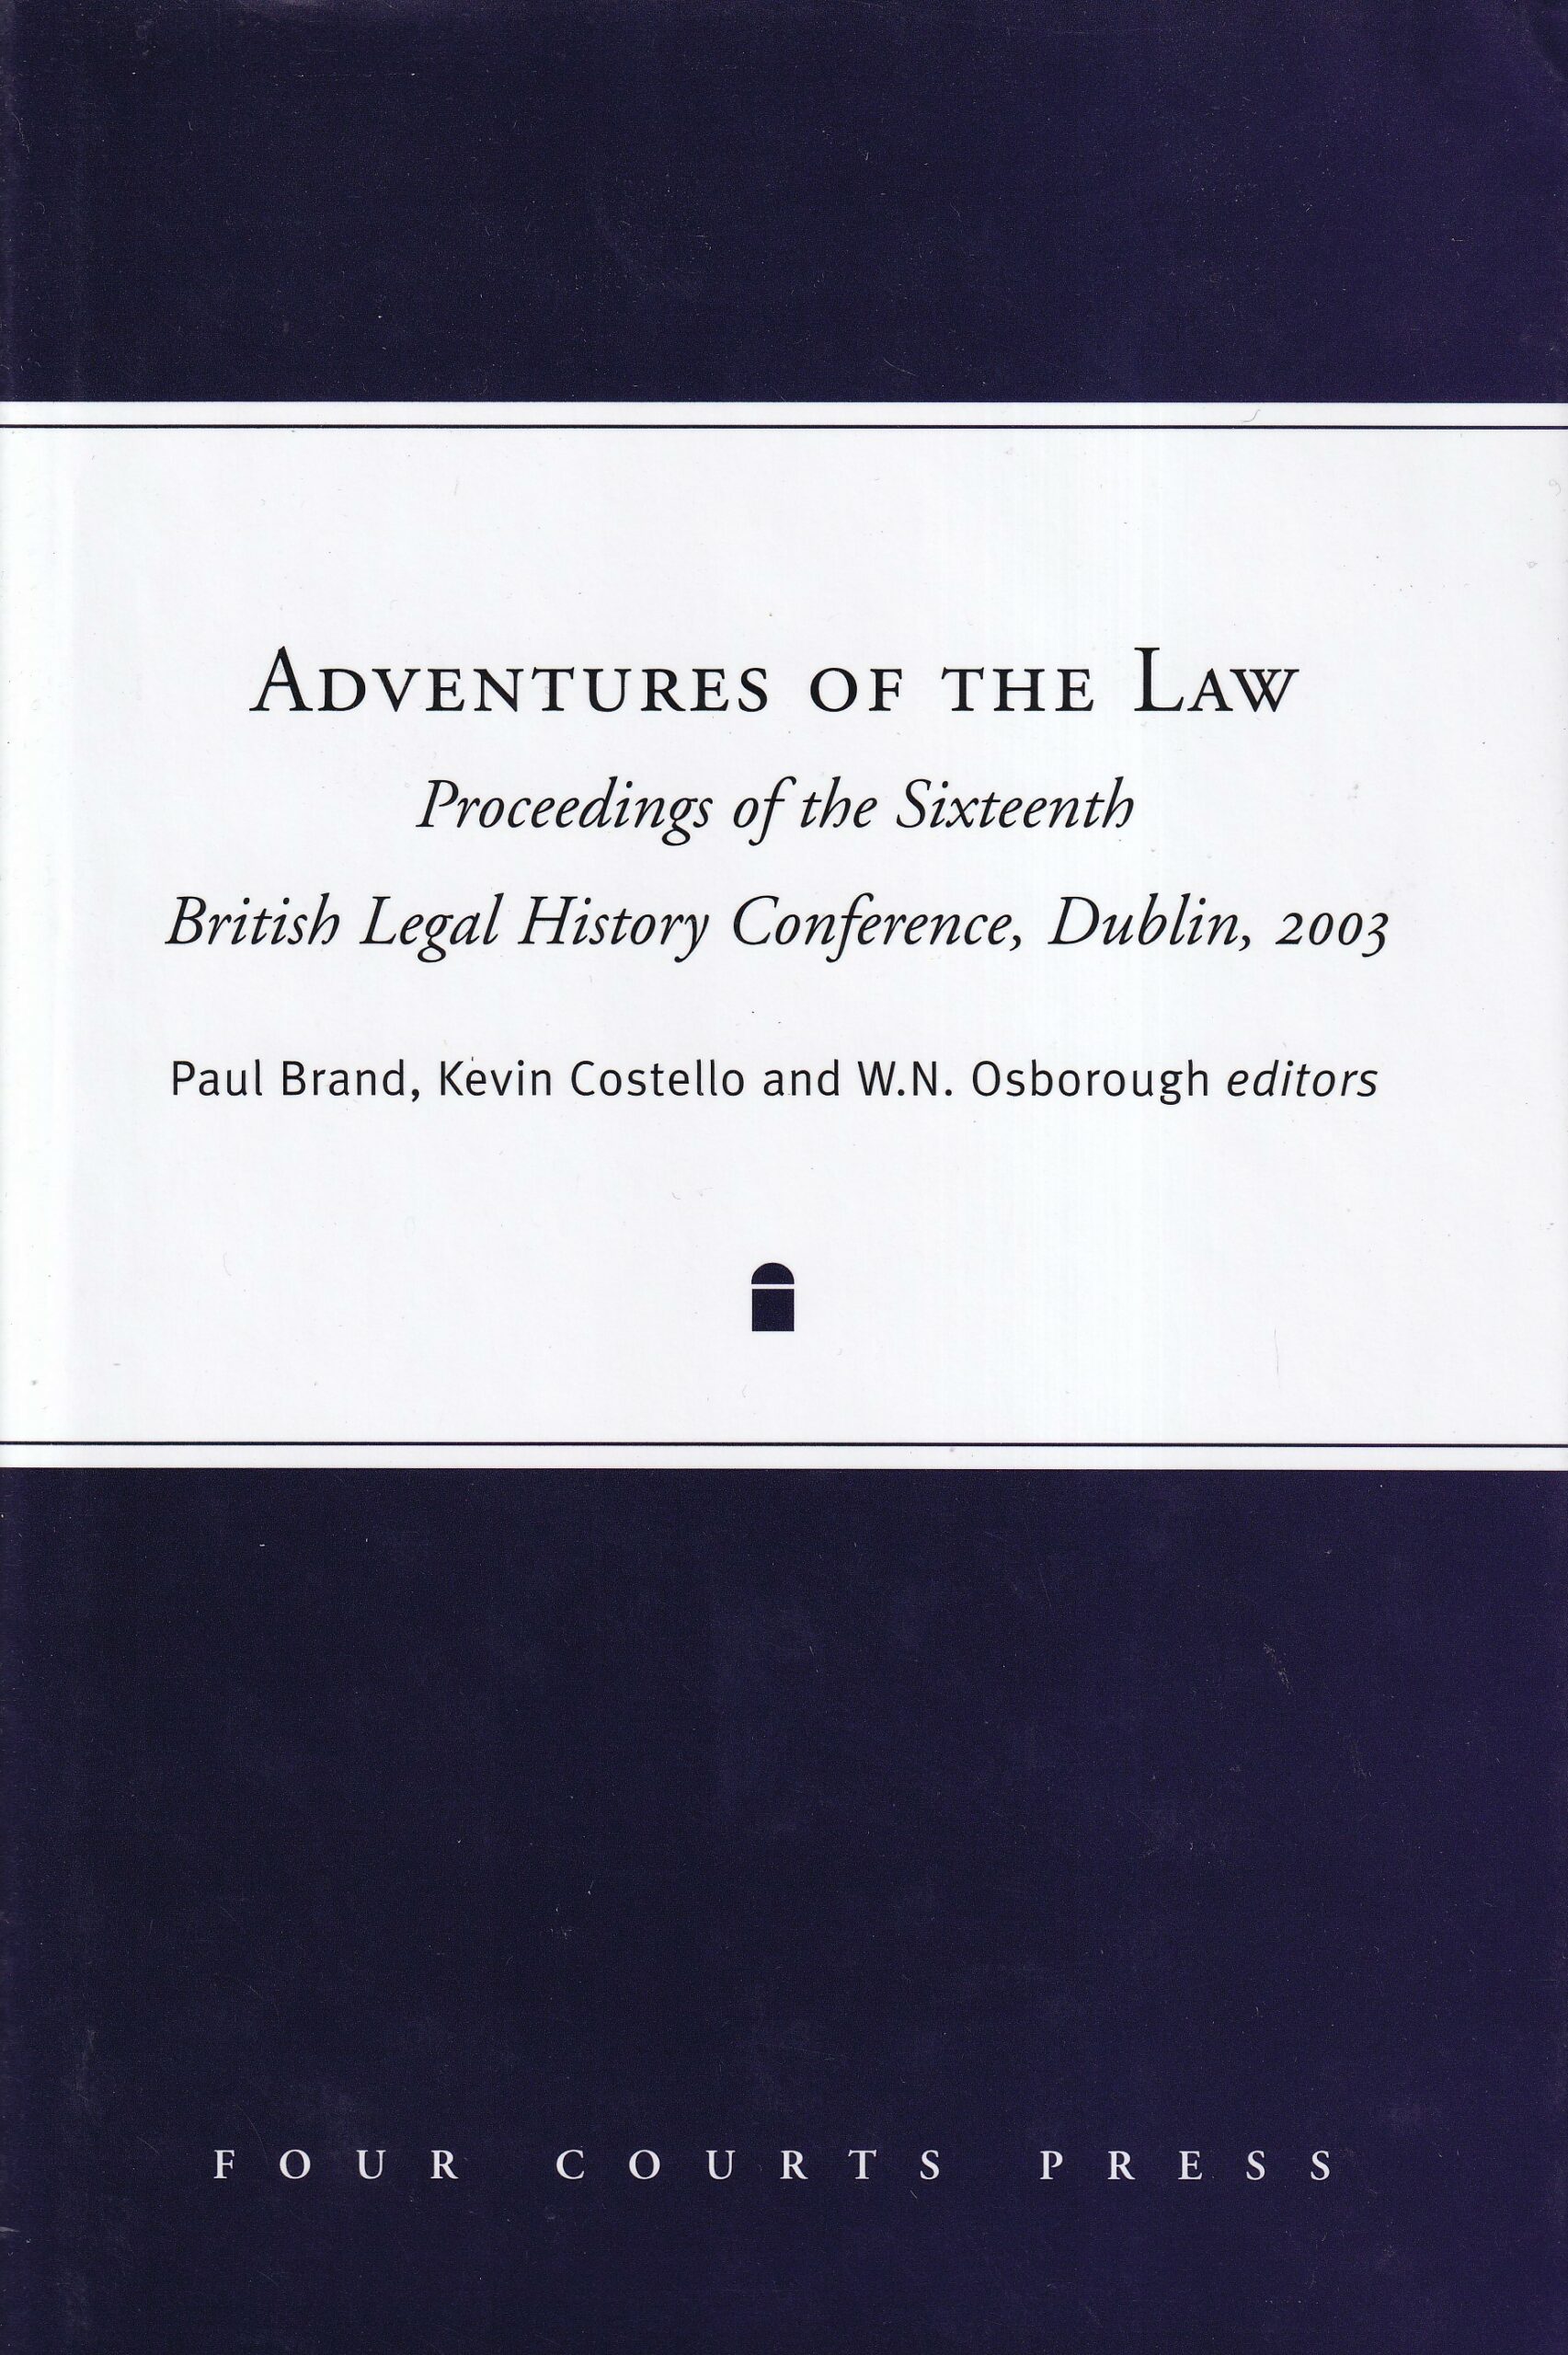 Adventures of the Law: Proceedings of the Sixteenth British Legal History Conference, Dublin 2003 by Paul Brand, Kevin Costello and W.N. Osborough (eds.)